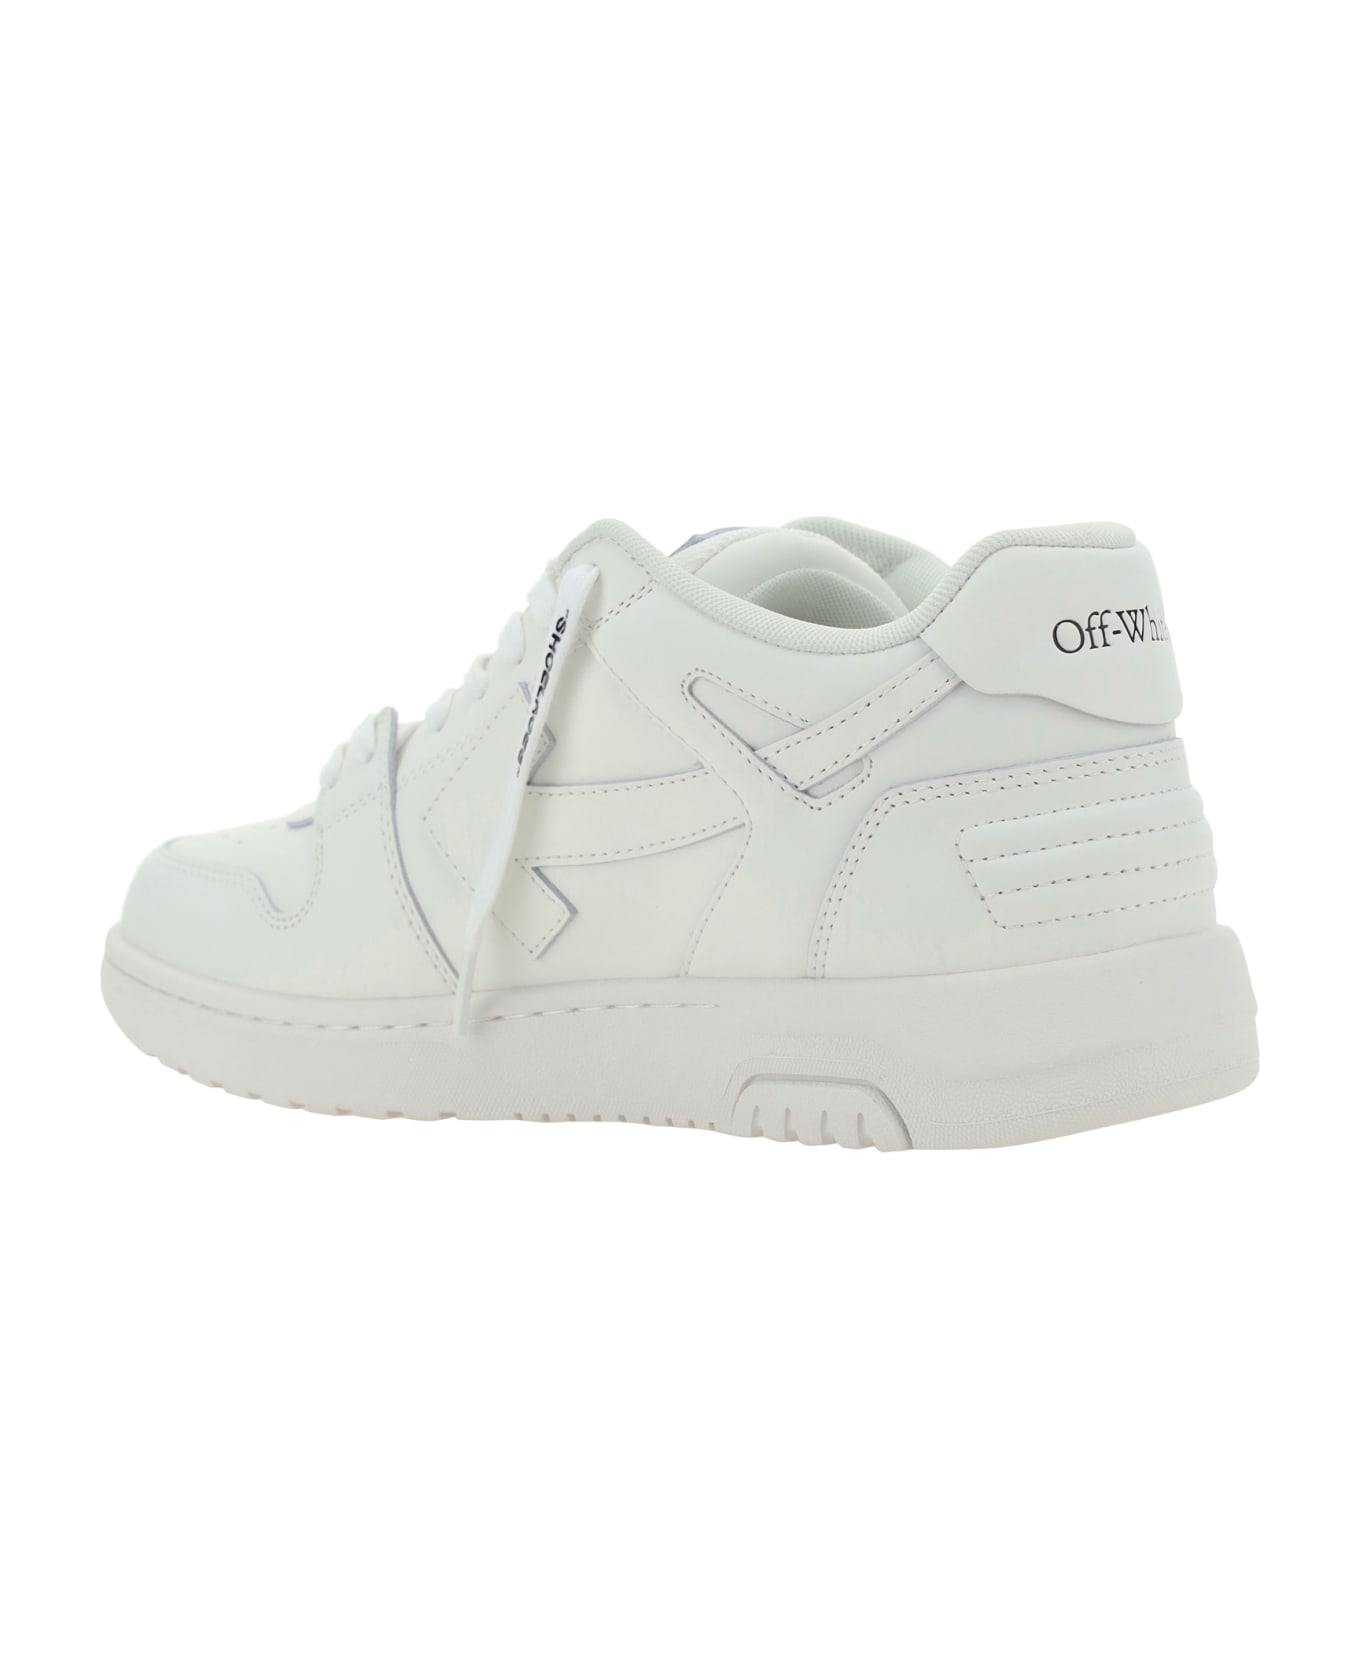 Off-White Out Of Office Sneakers - White White スニーカー